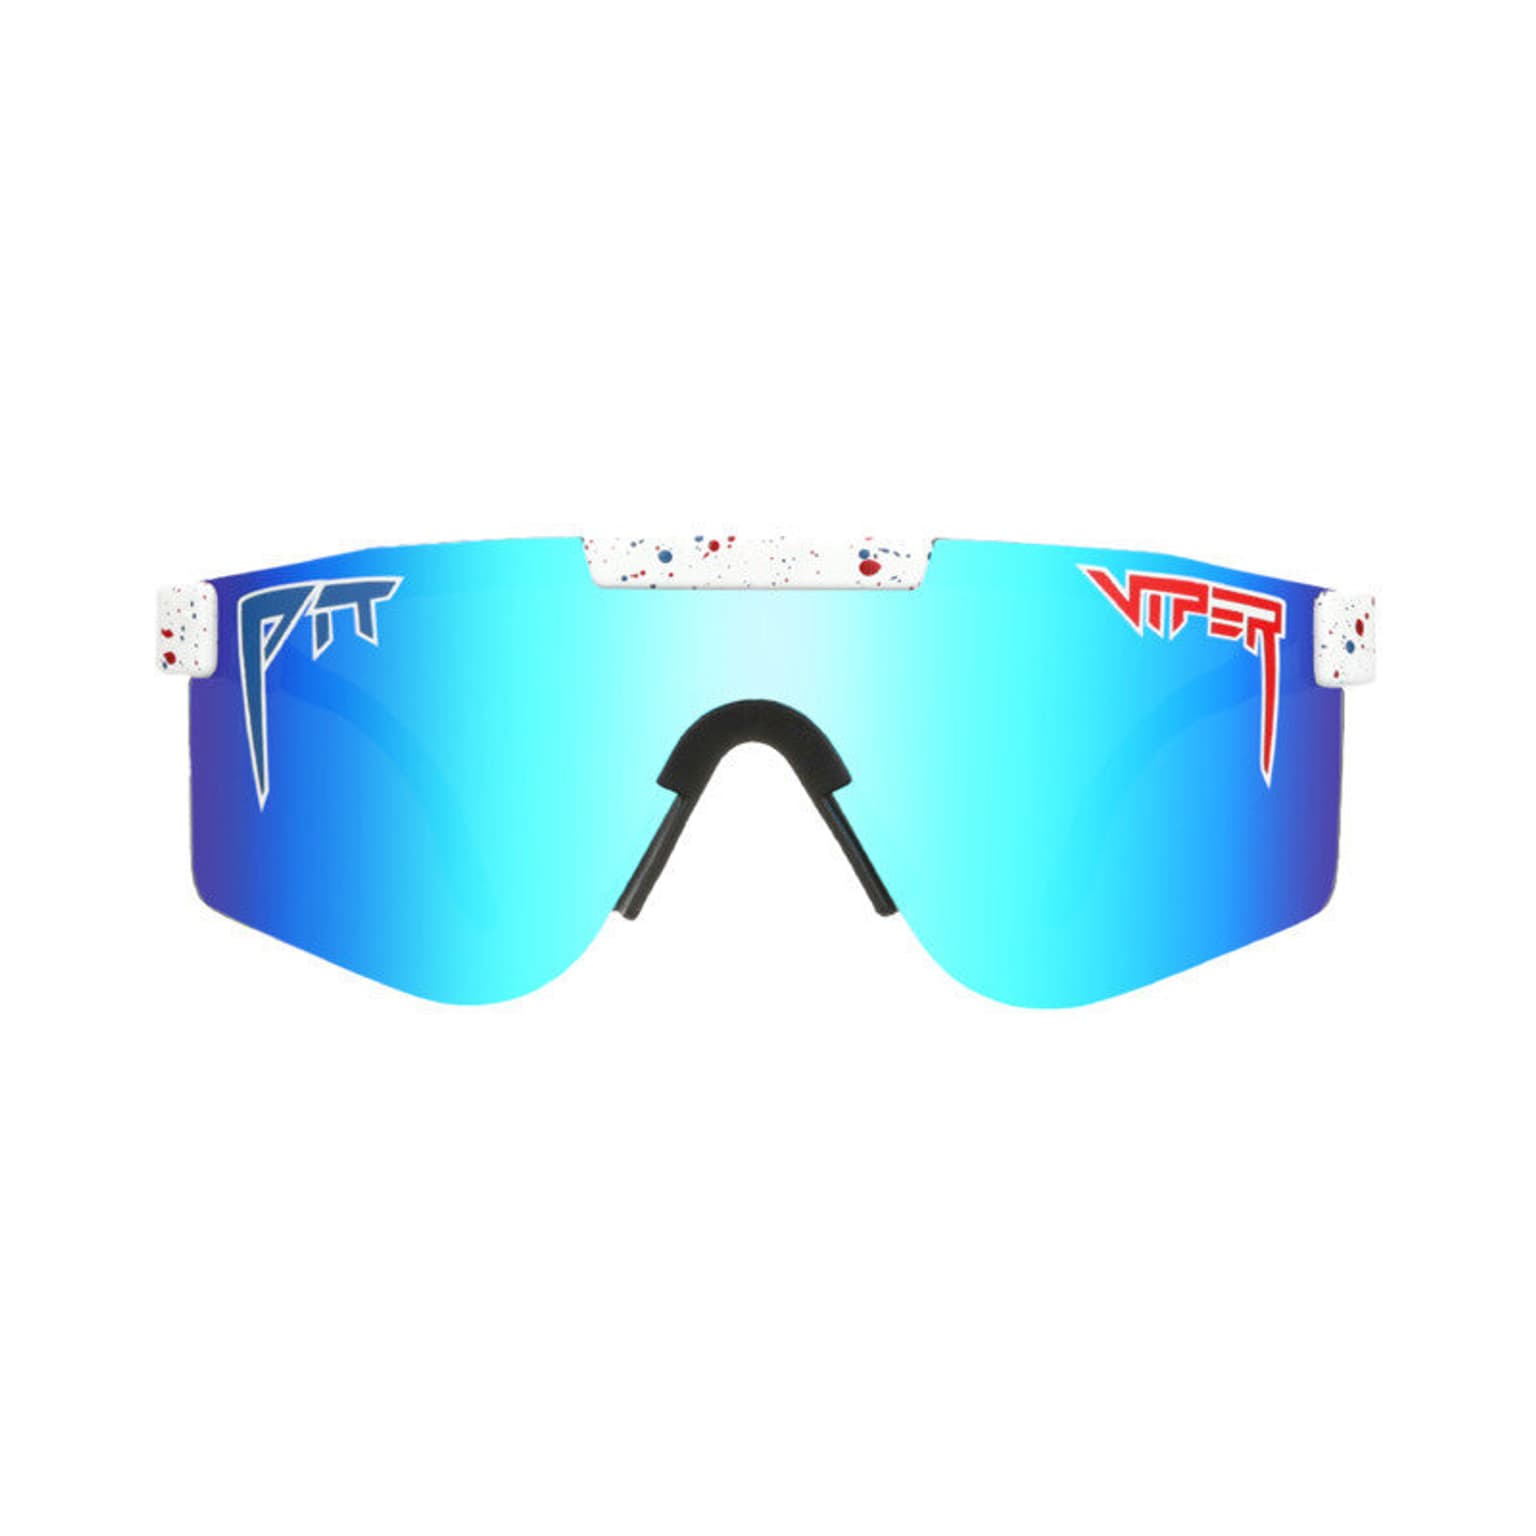 Pit Viper Pit Viper The Absolute Freedom Polarized Double Wide Lunettes de sport 1